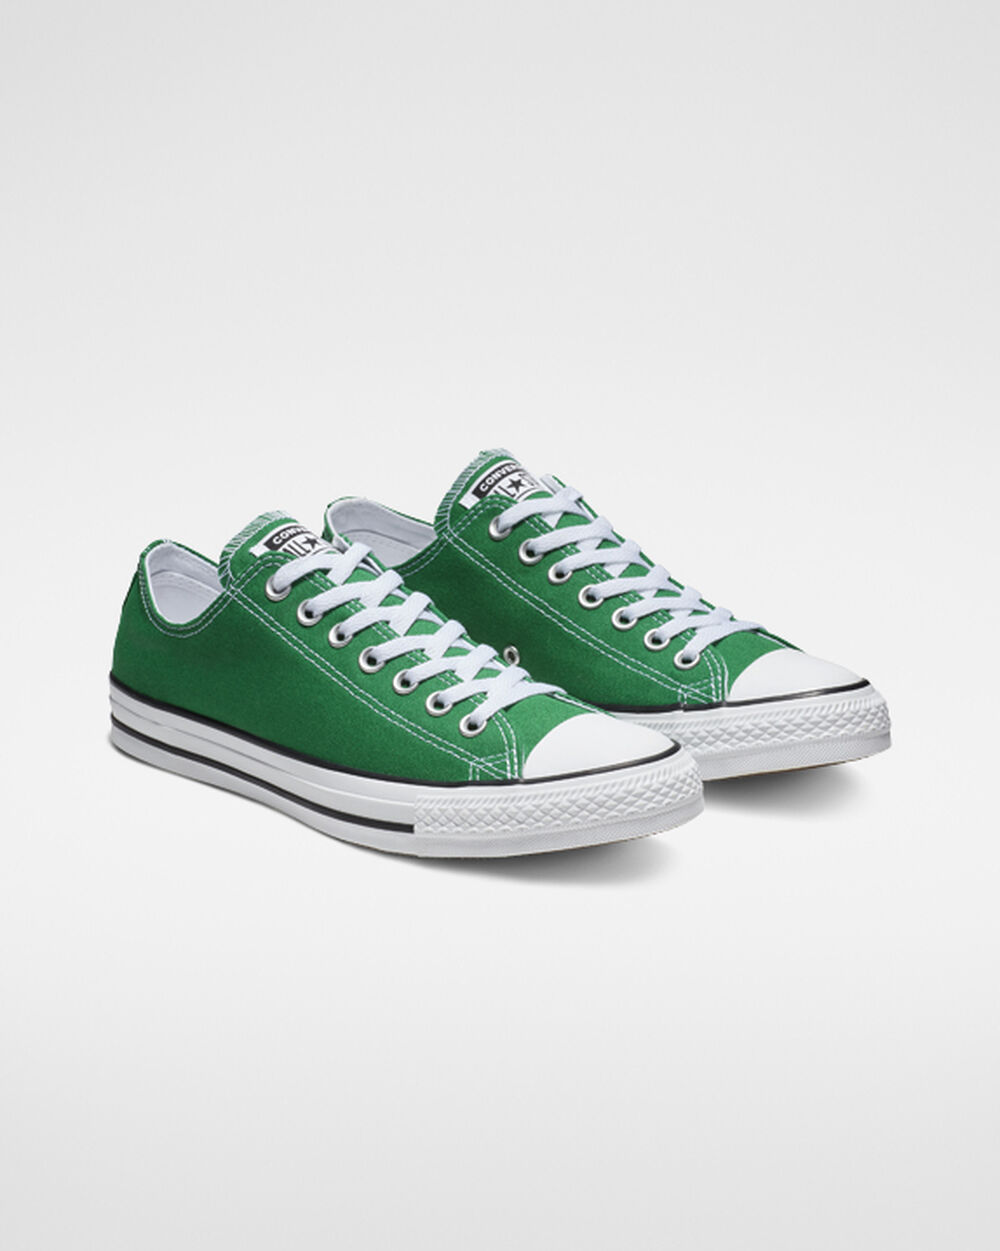 Tenis Converse Chuck Taylor All Star Mujer Verdes | Mexico-680156